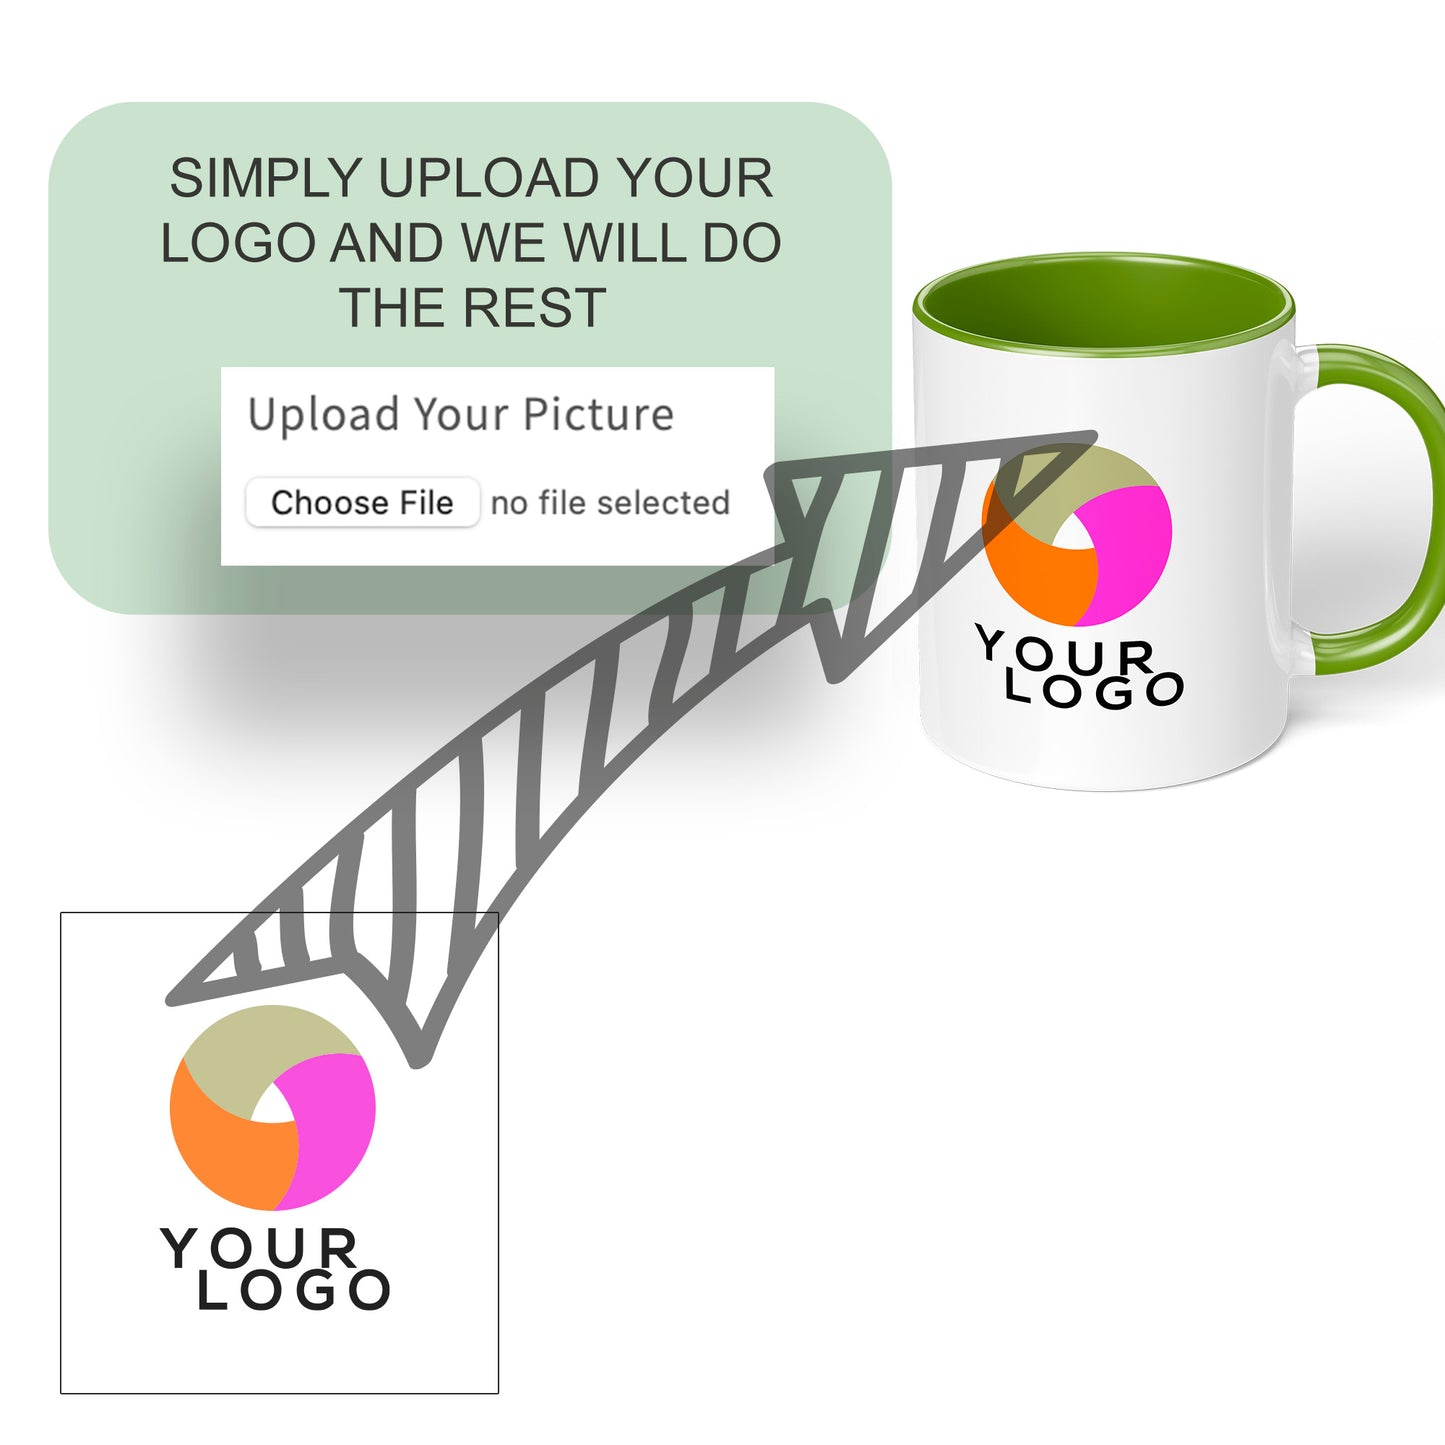 Branded Mugs (Light Green) - Fully Inclusive Pricing Full Colour Both Sides &  Free Delivery